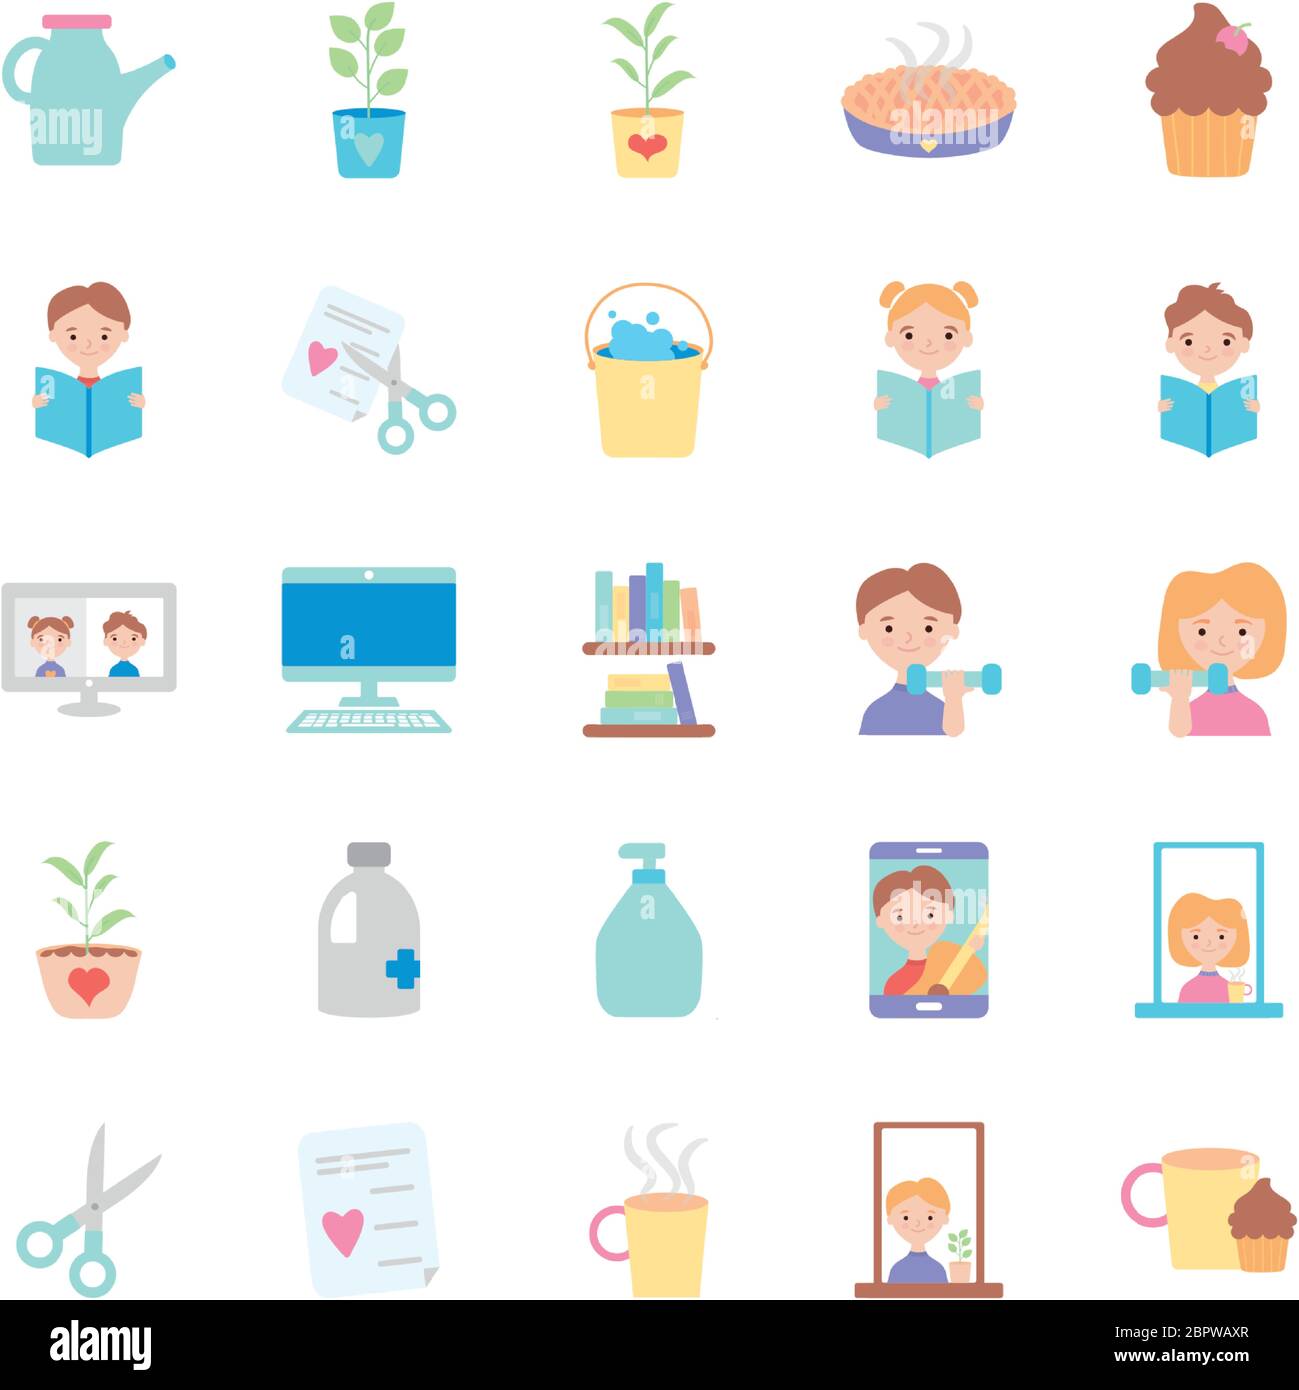 cupcake and stay at home icon set over white background, flat style, vector illustration Stock Vector